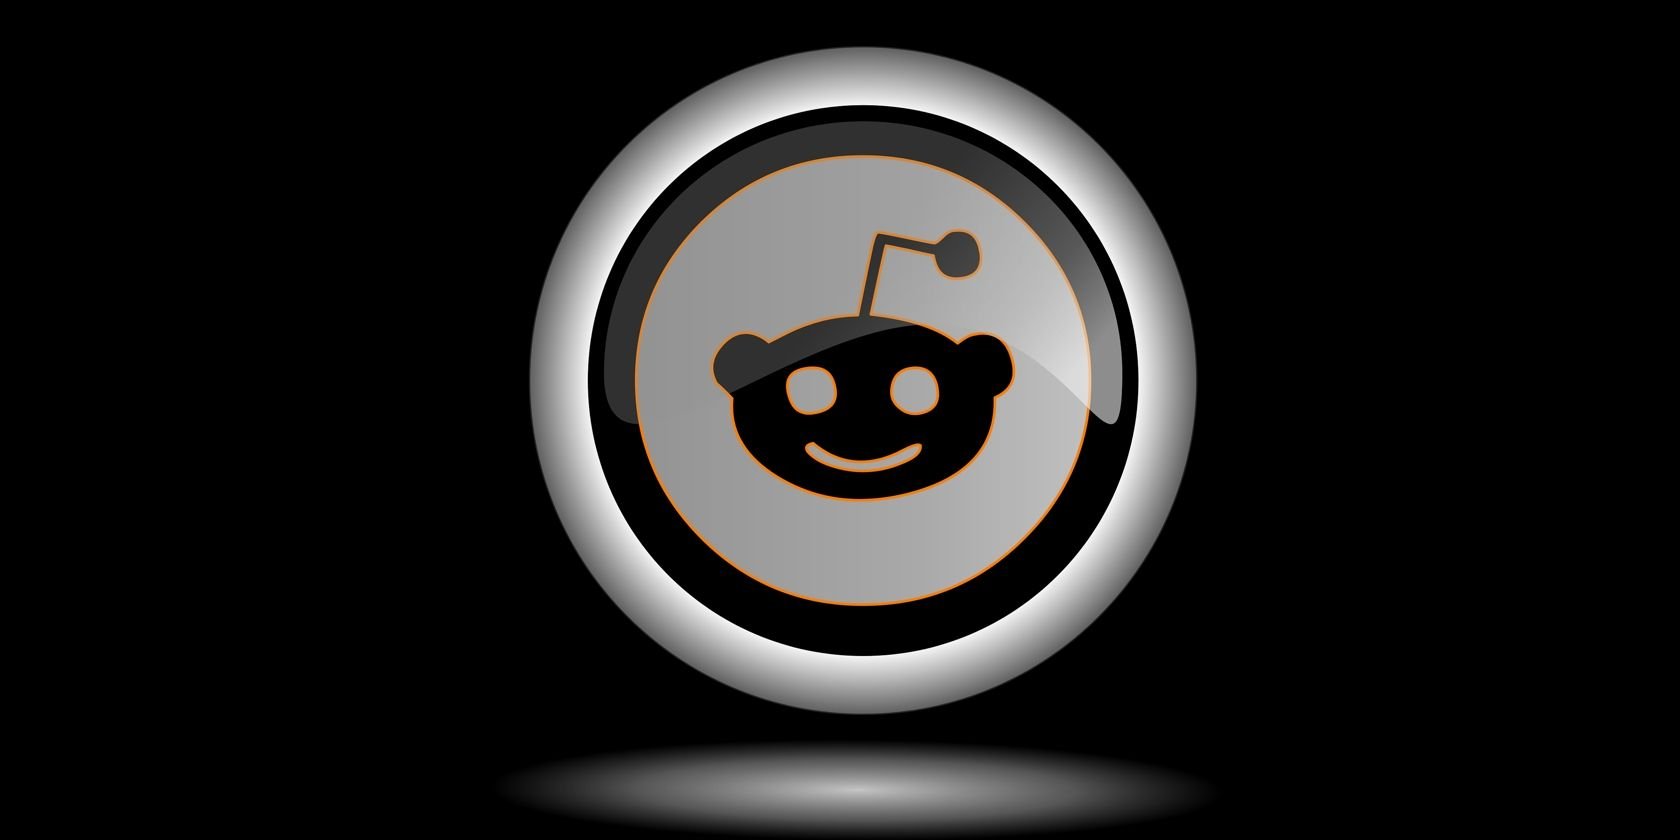 How to Change Your Reddit App Icon